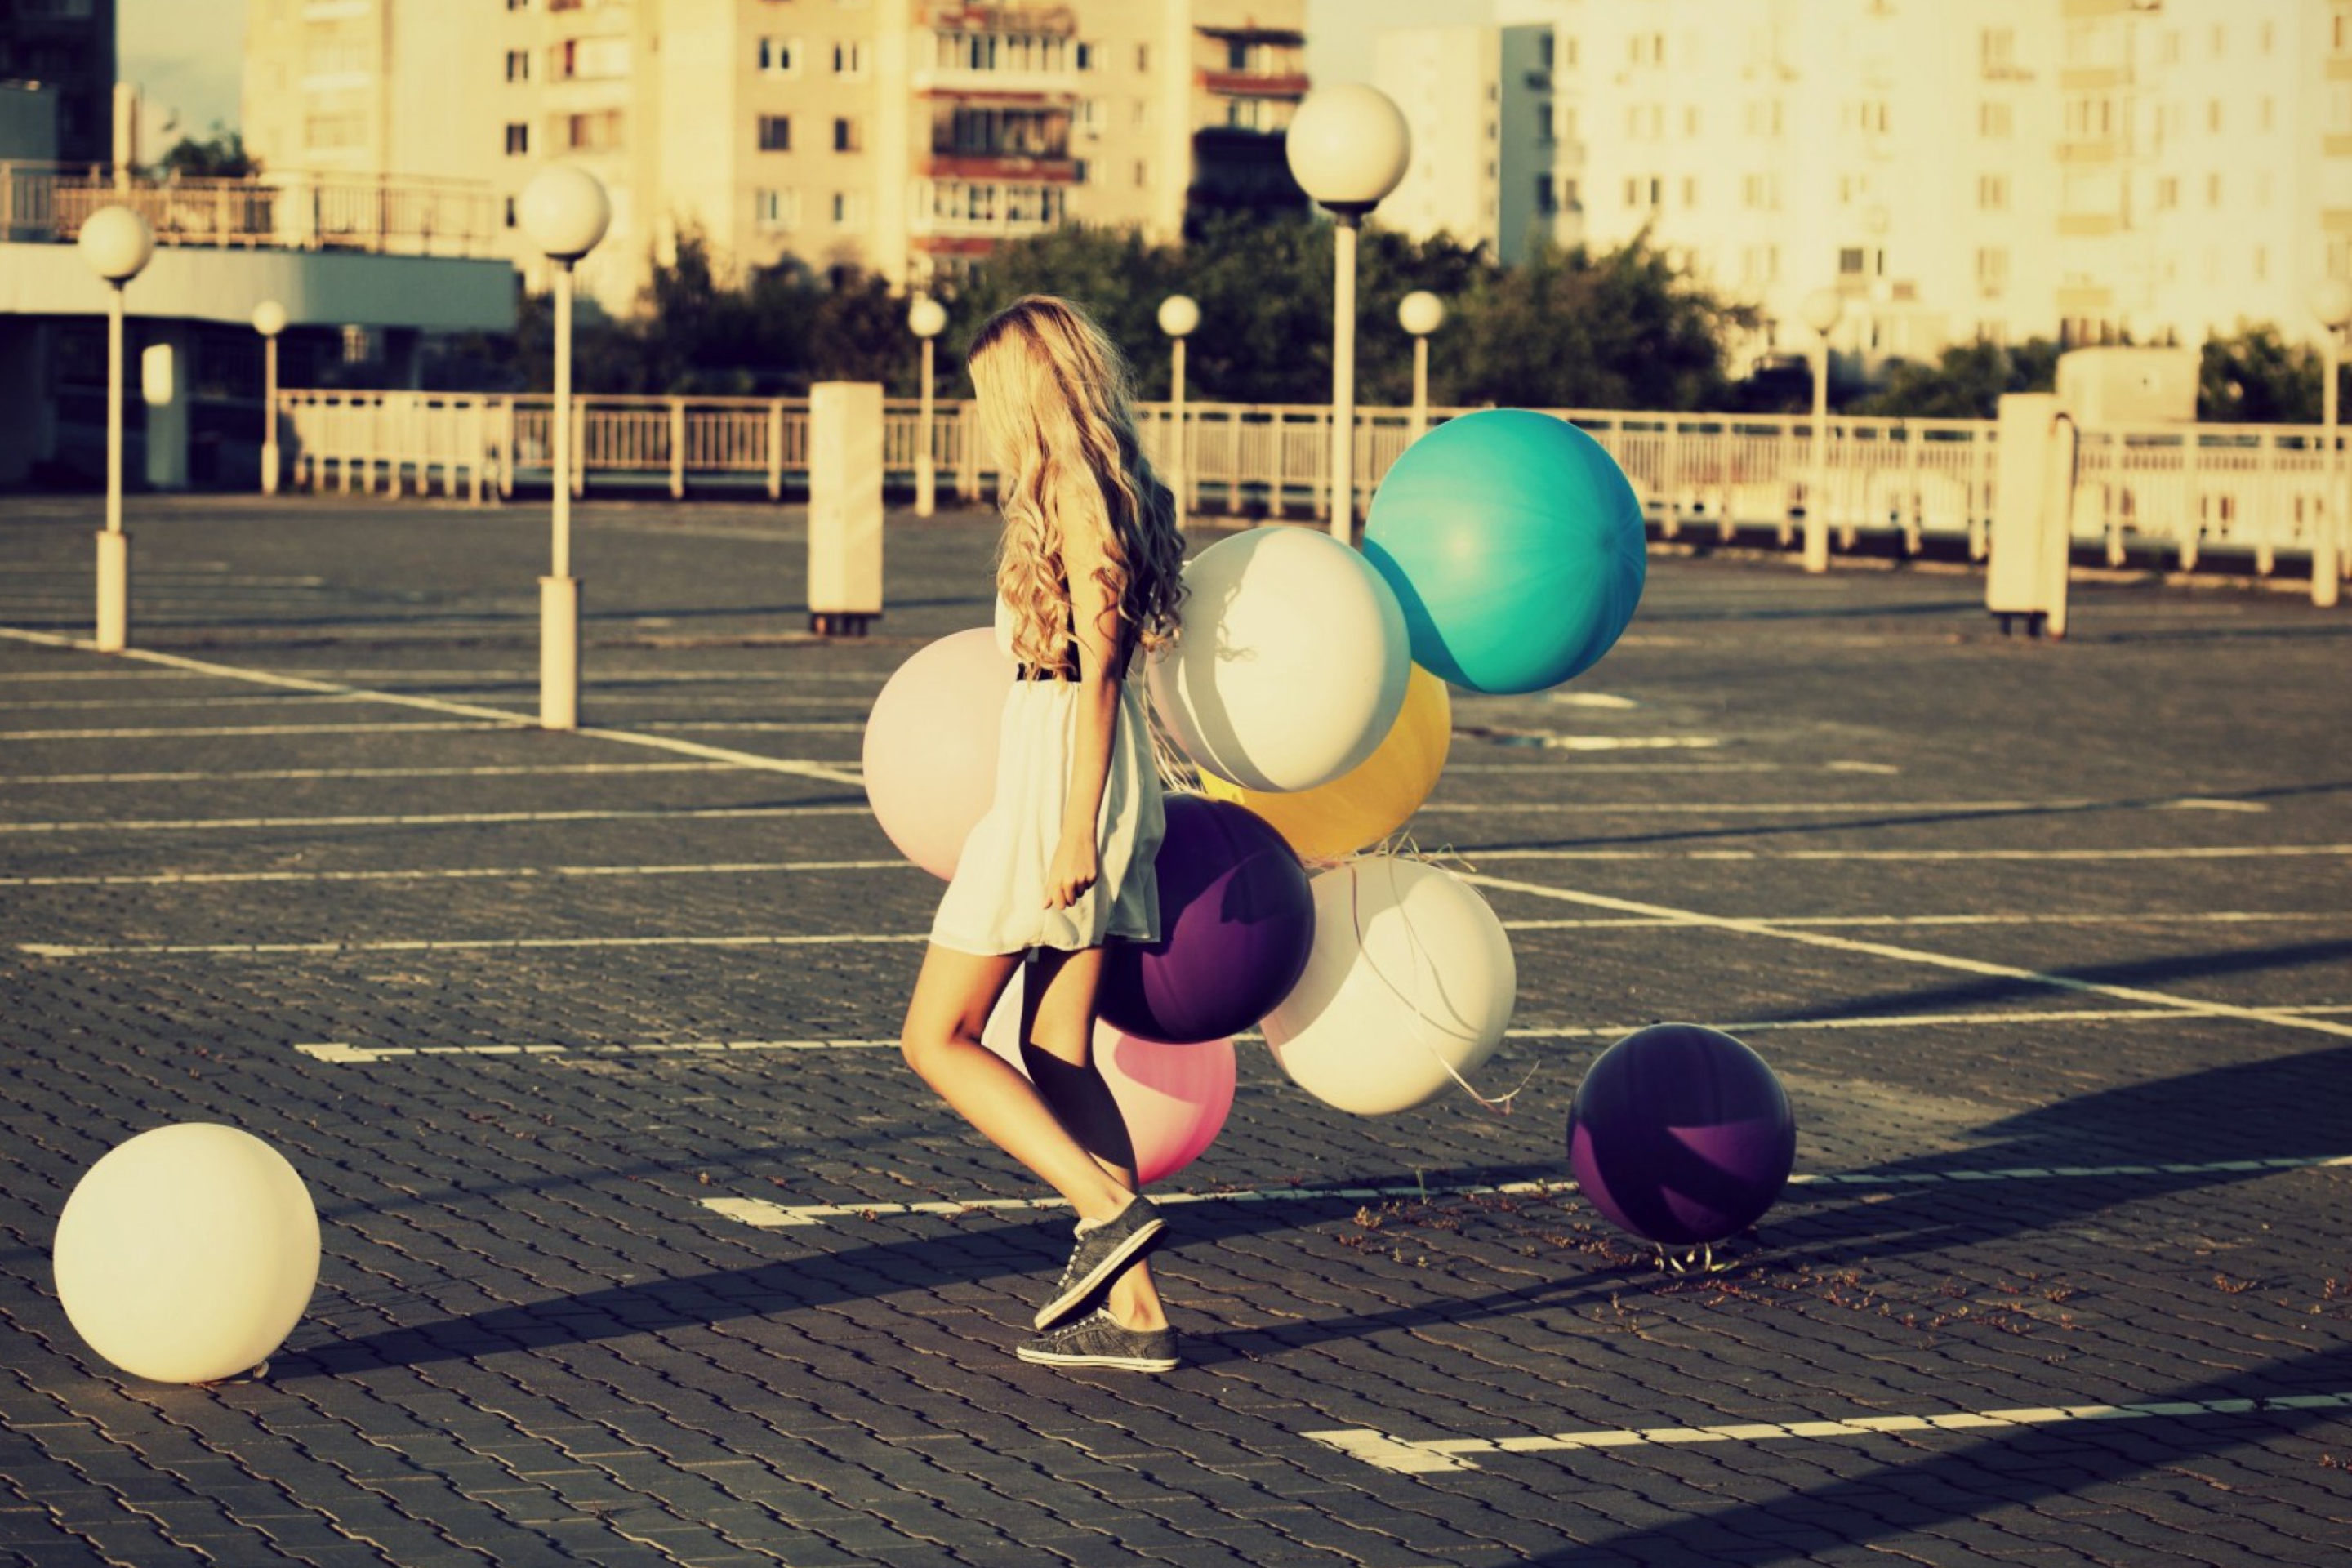 Happy Girl With Colorful Balloons screenshot #1 2880x1920